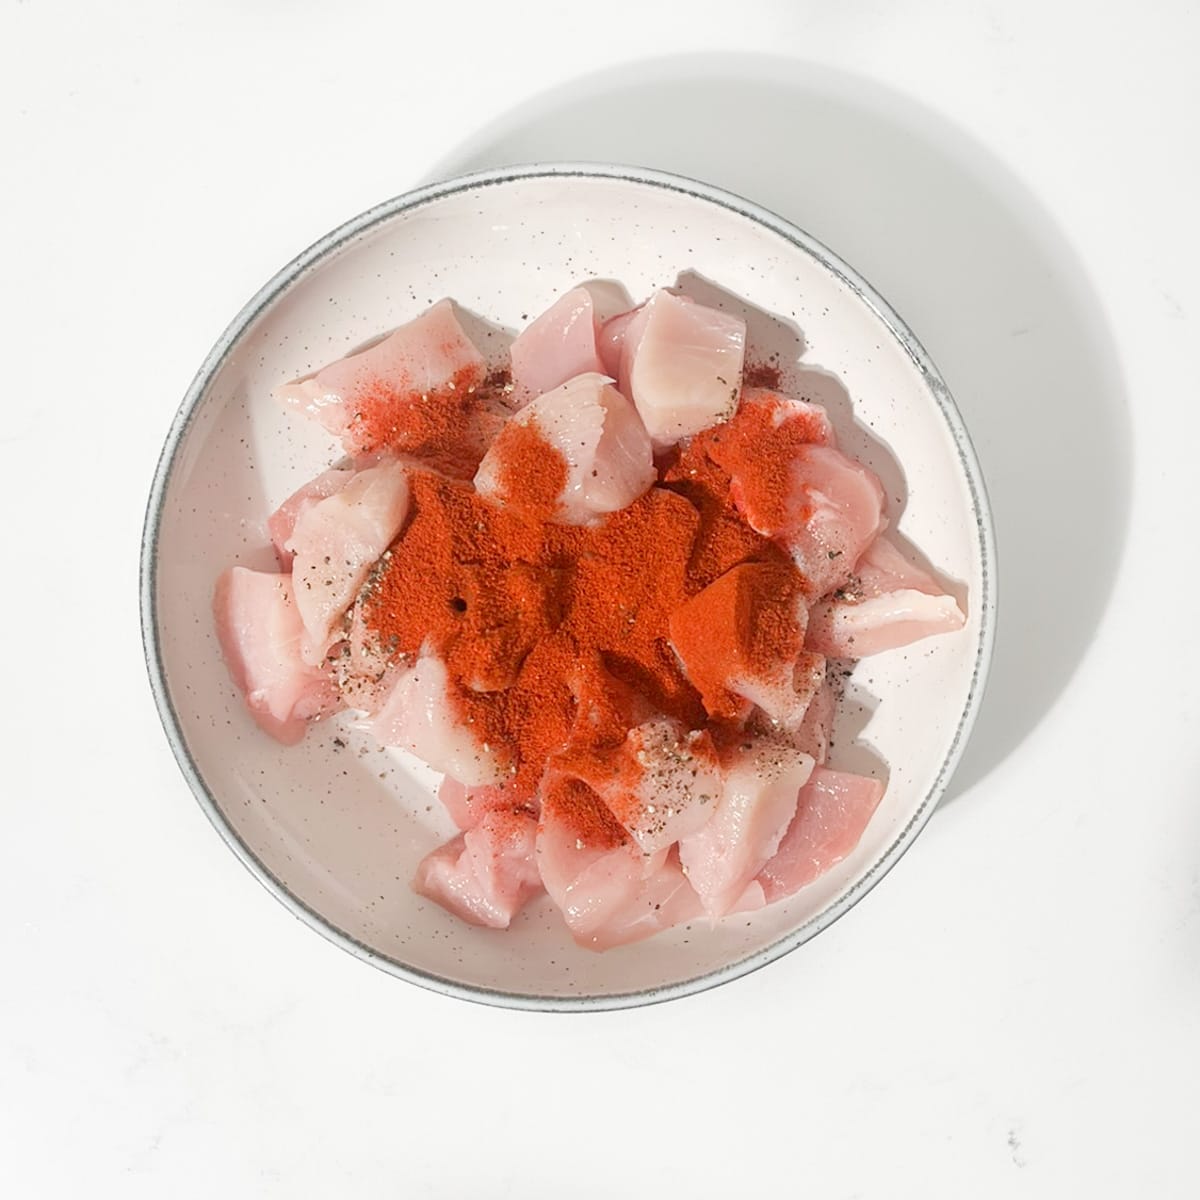 Coating the raw chicken with salt, pepper and smoked paprika in a white bowl.